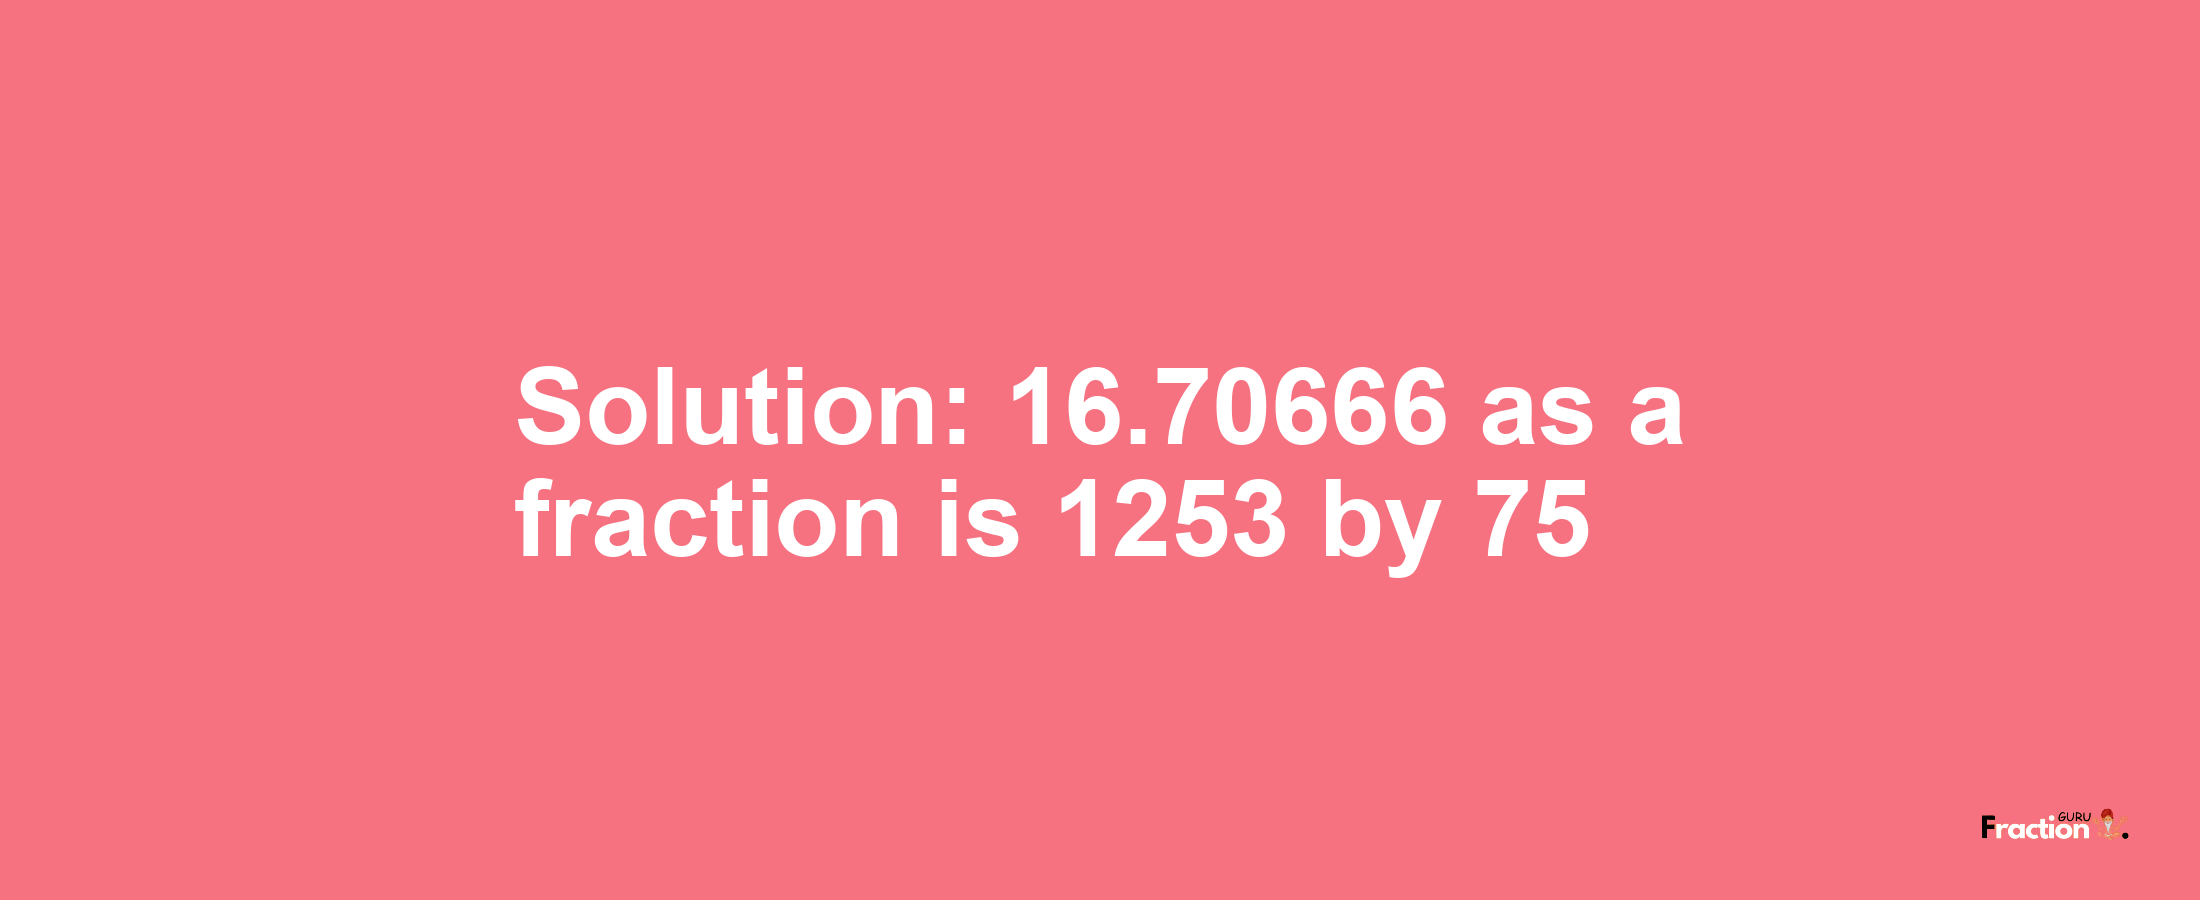 Solution:16.70666 as a fraction is 1253/75